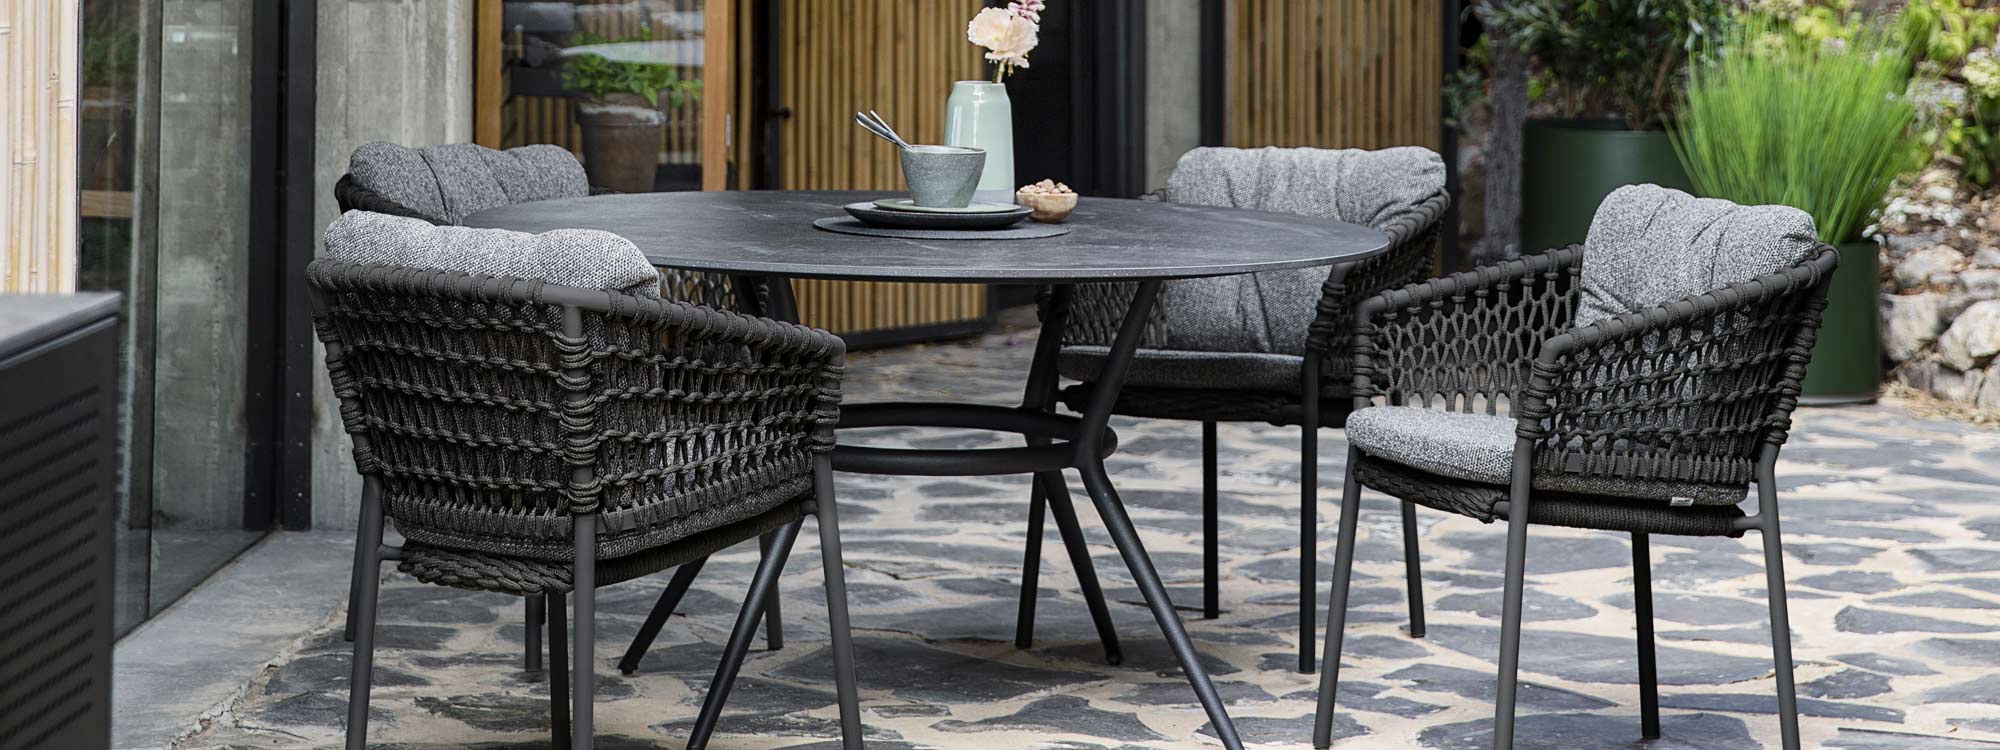 Image of Joy round garden table with black Fossil ceramic top, together with Ocean garden chairs by Cane-line